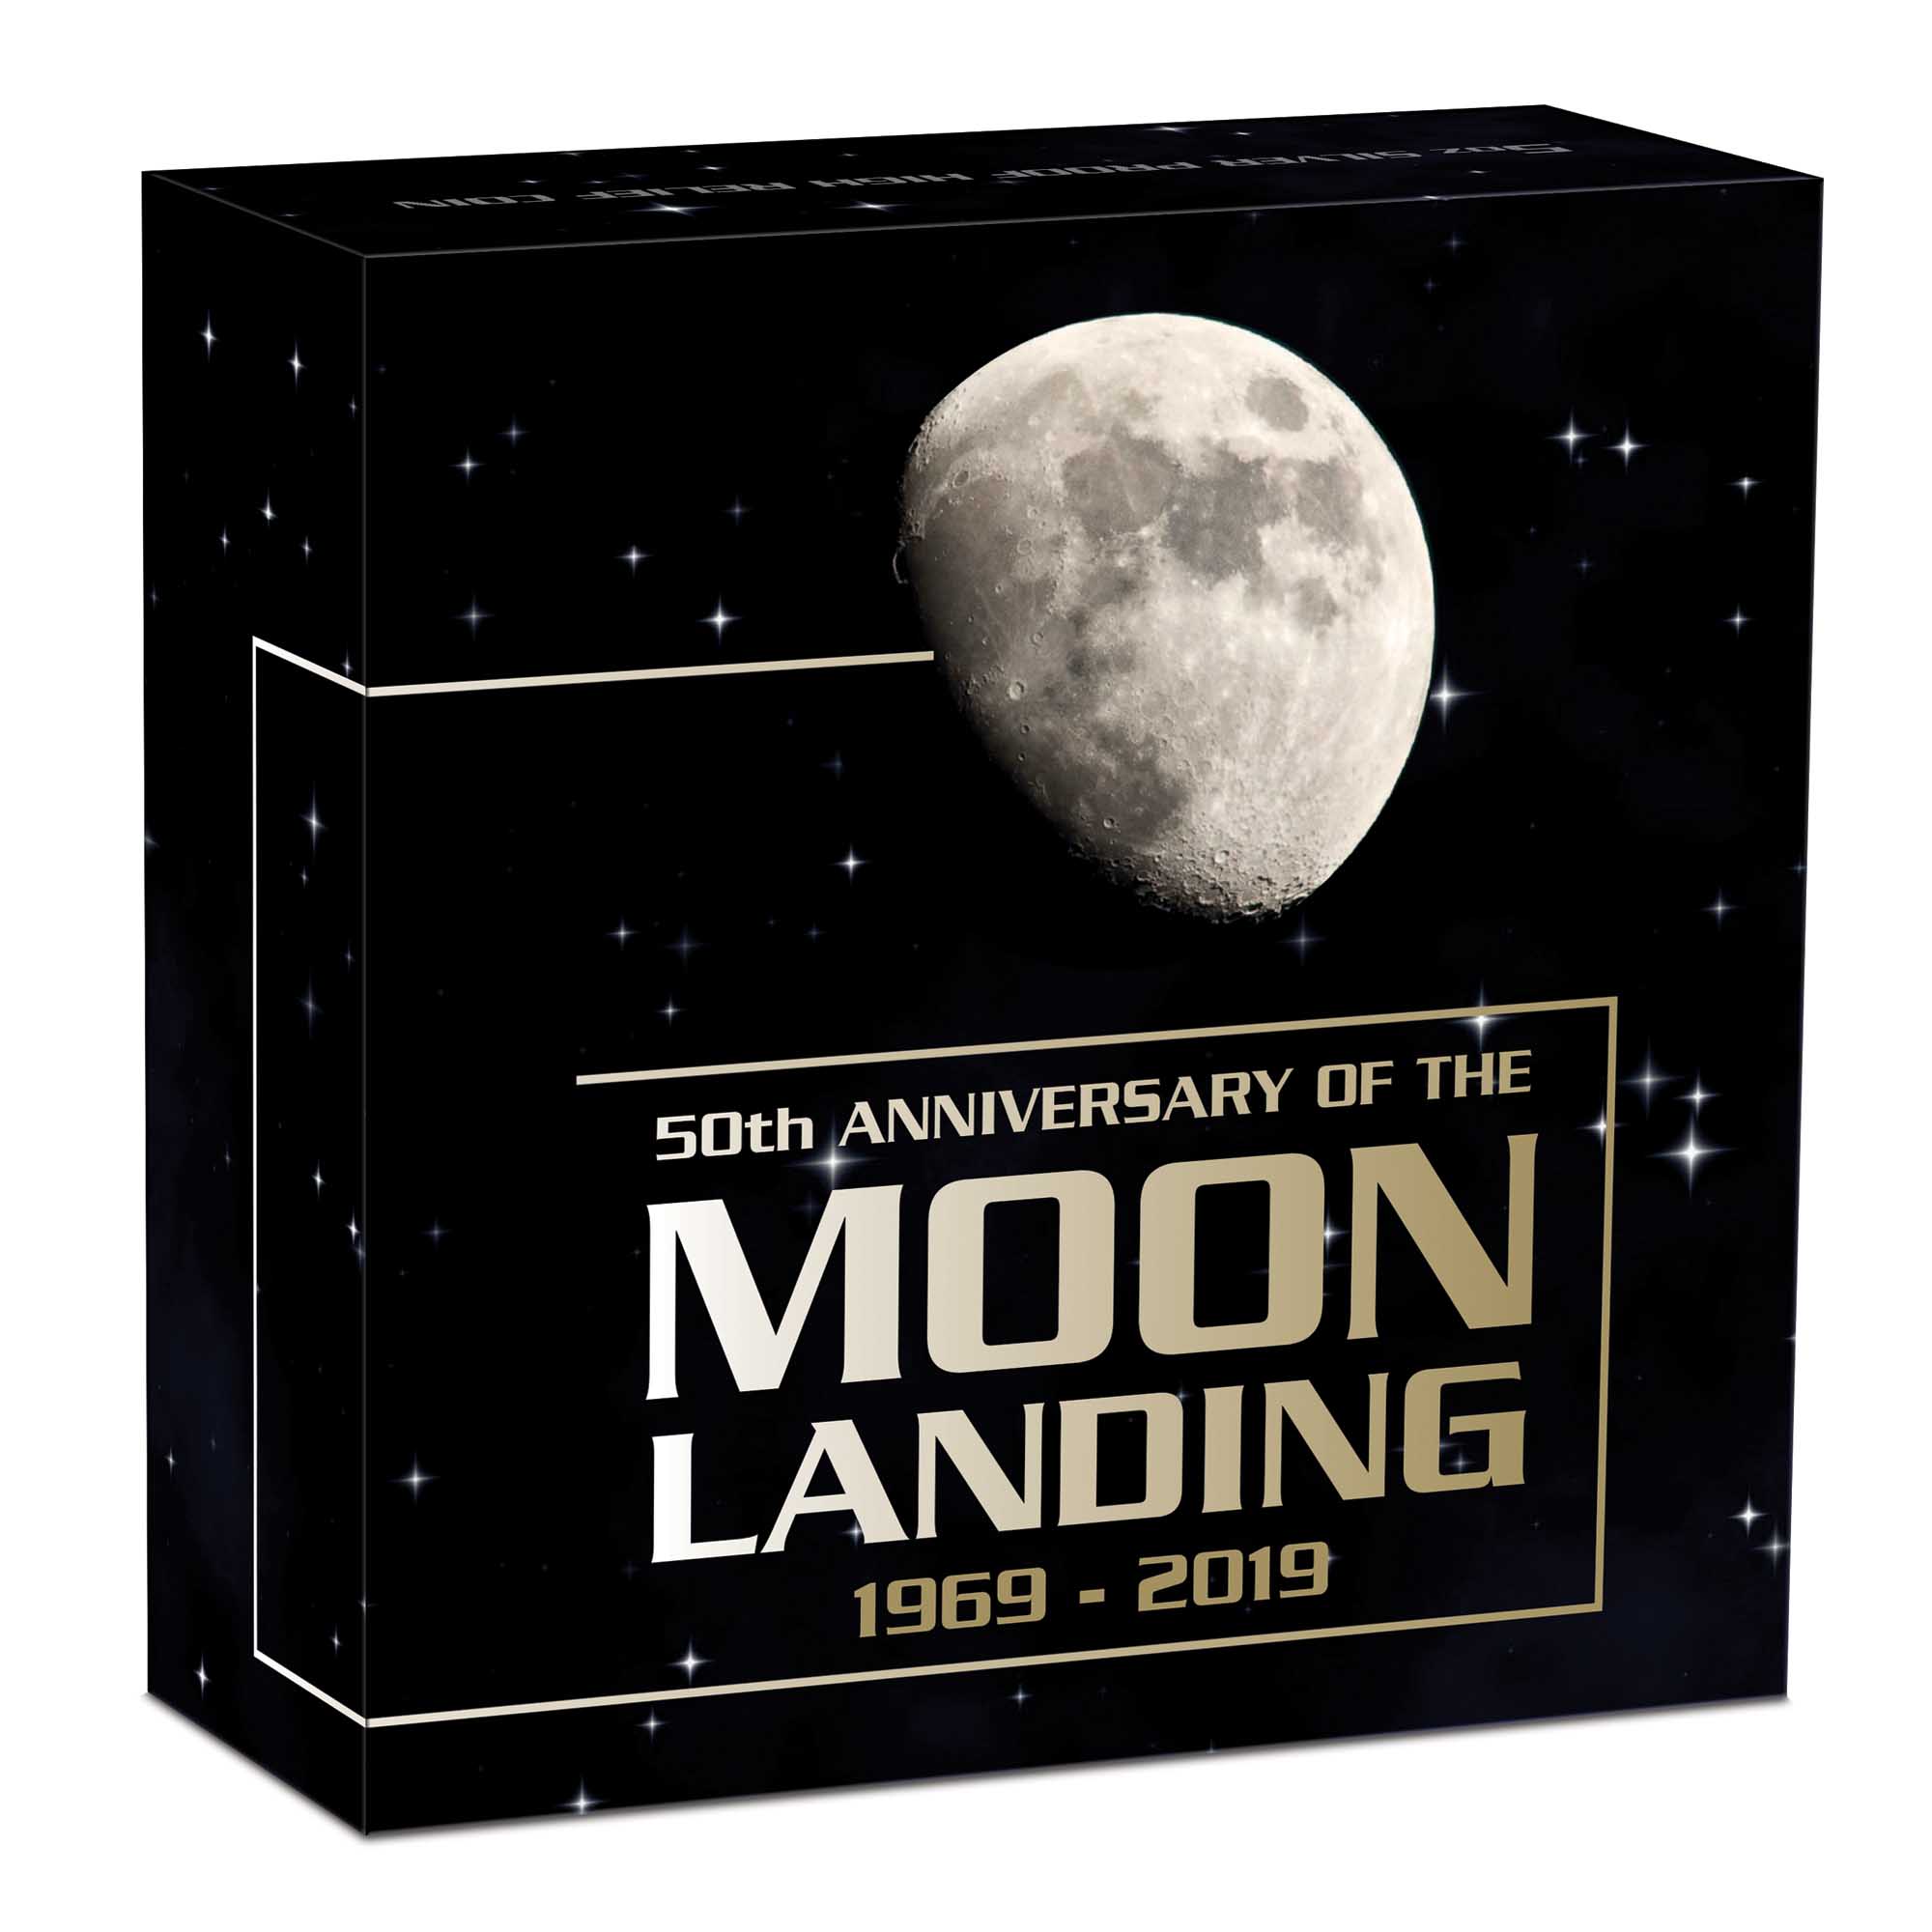 05 50th anniversary of the moon landing 2019 5oz silver proof high relief InShipper